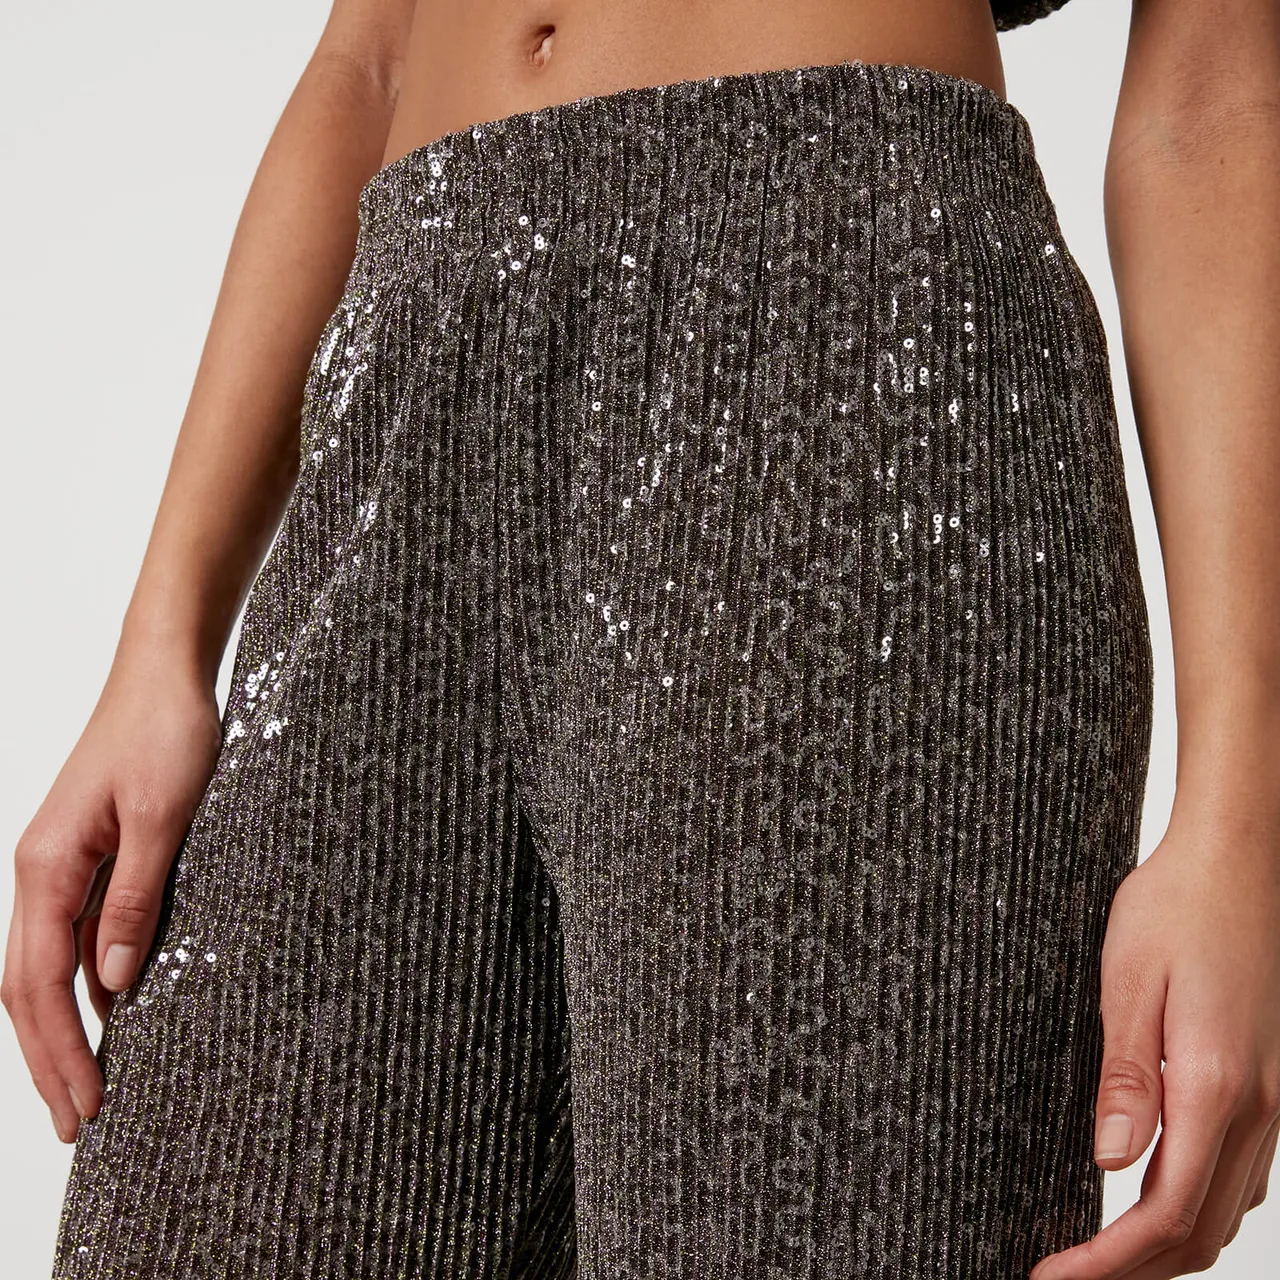 Stine Goya Markus Woven Sequined Lurex Trousers